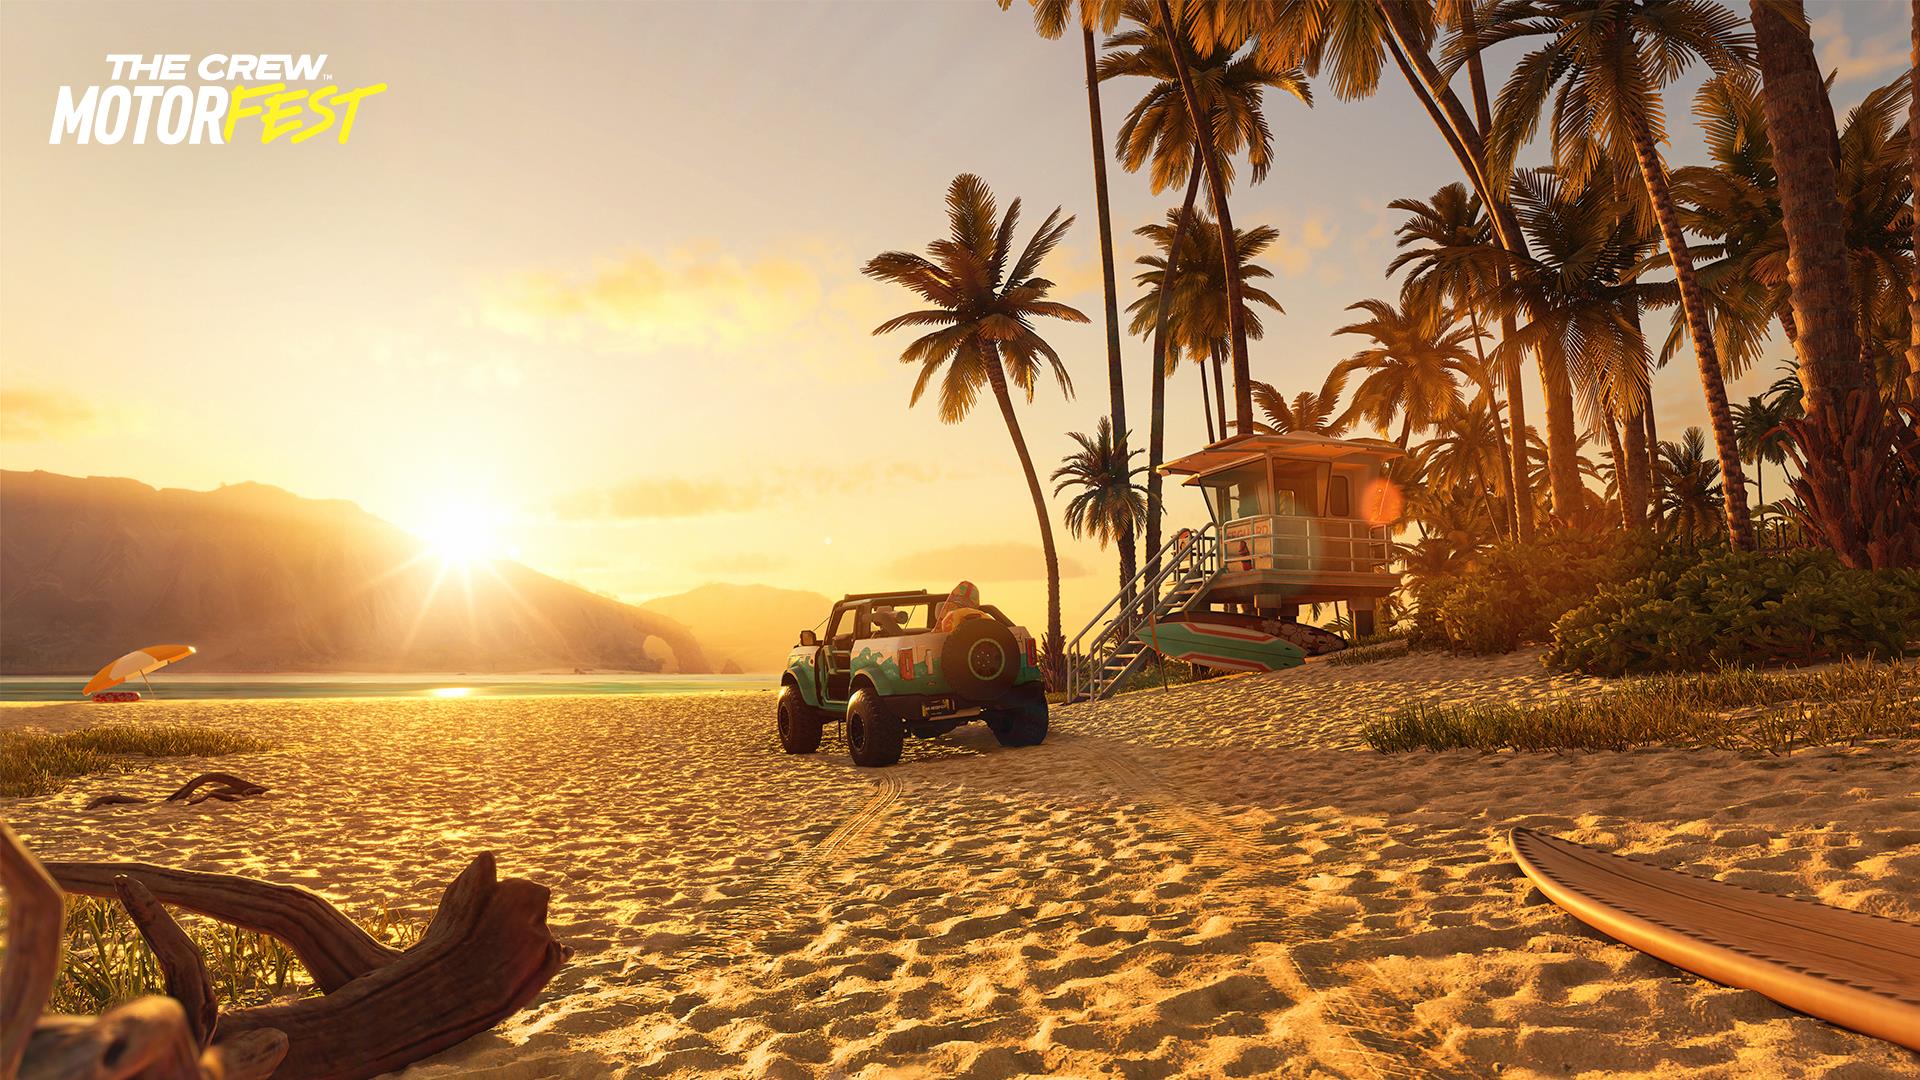 Preview: 'The Crew Motorfest' takes players on curated trip to Hawaii